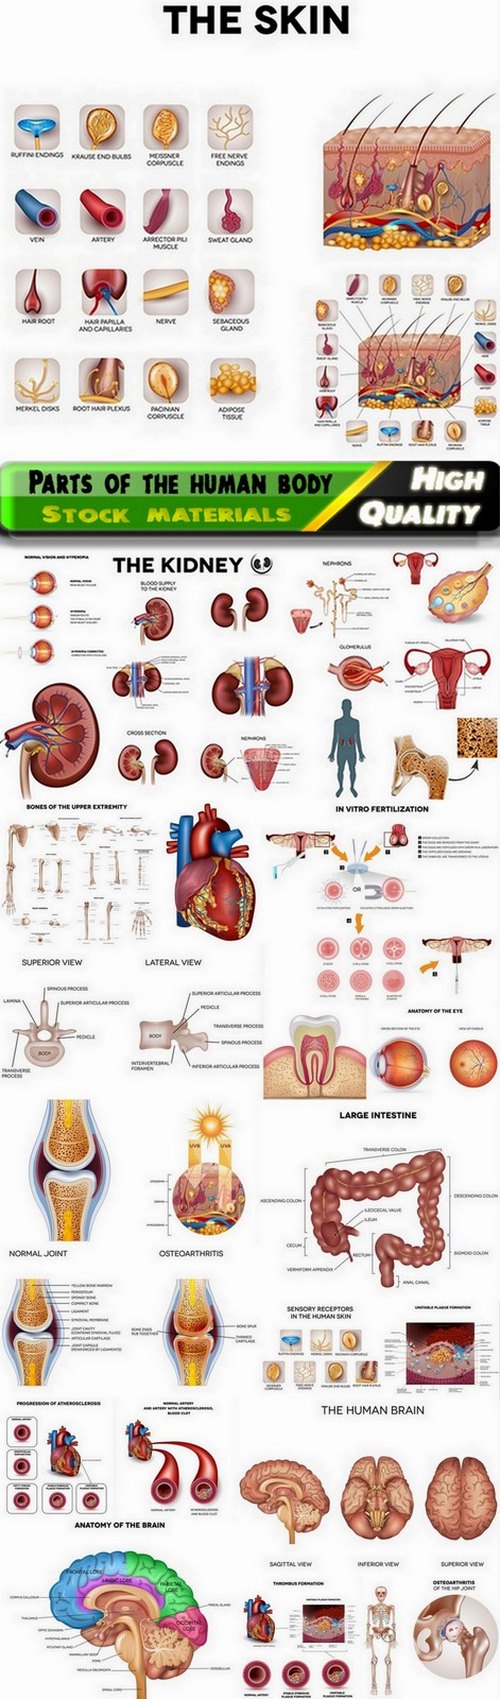 Parts of the human body and their diseases